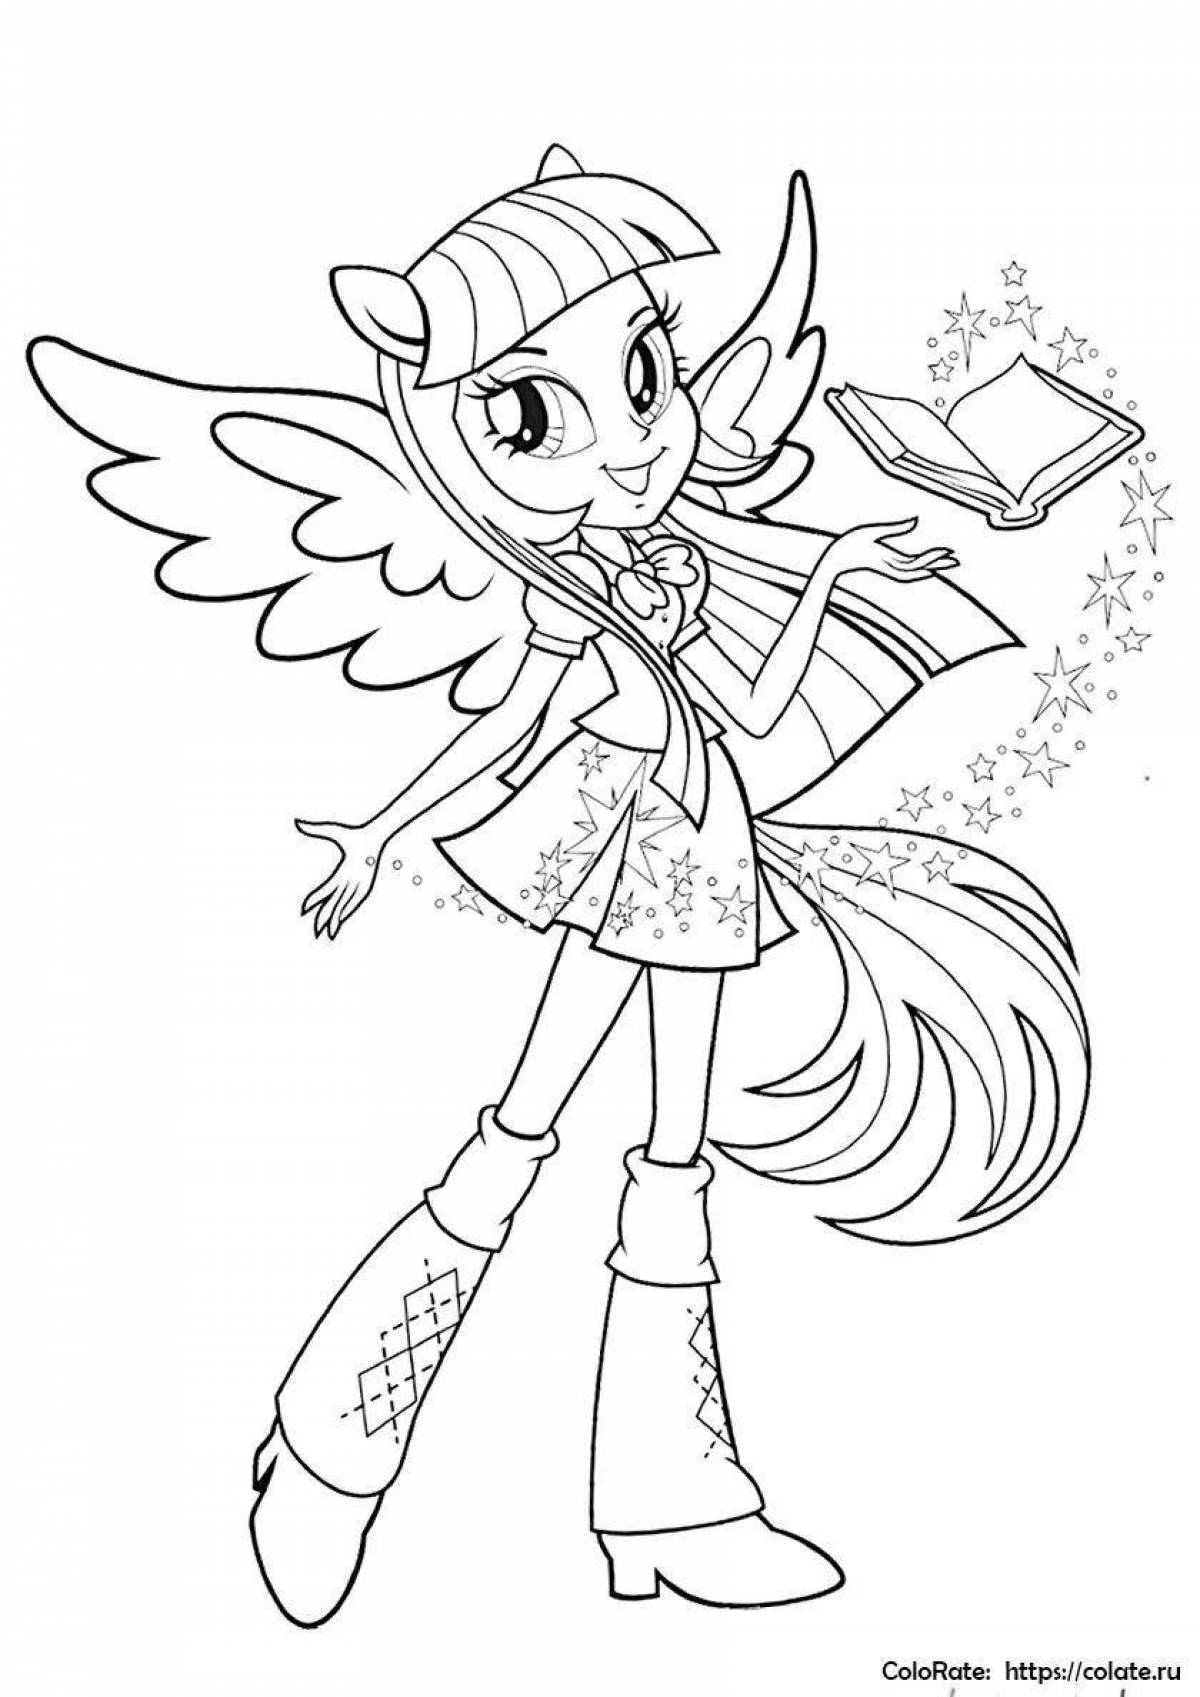 Equestria girl sparkle coloring page